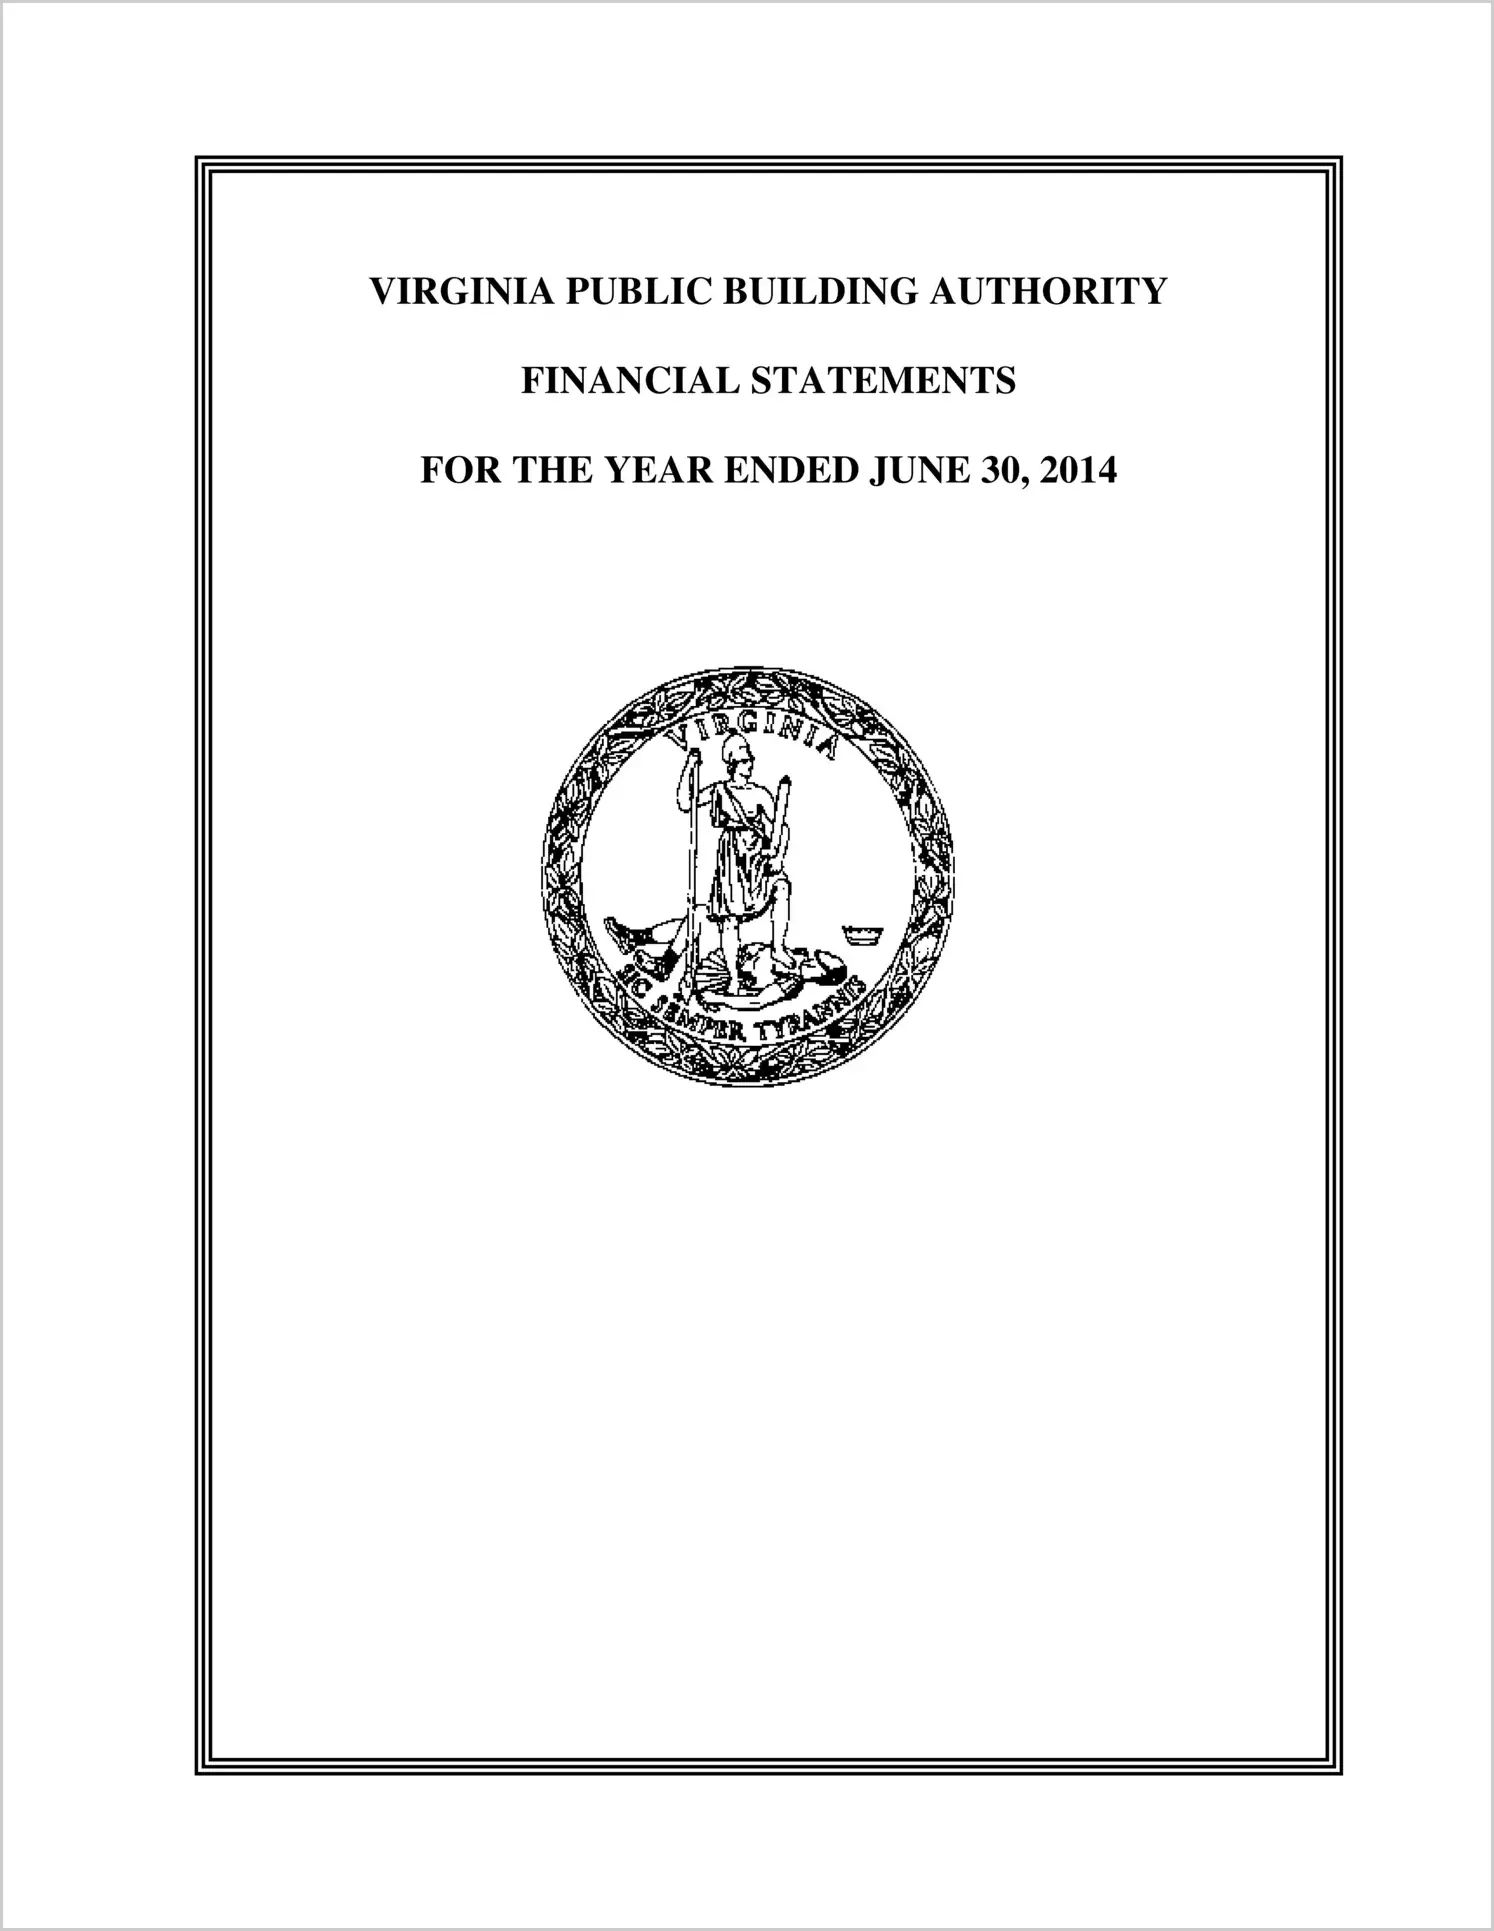 Virginia Public Building Authority Financial Statements for the year ended June 30, 2014